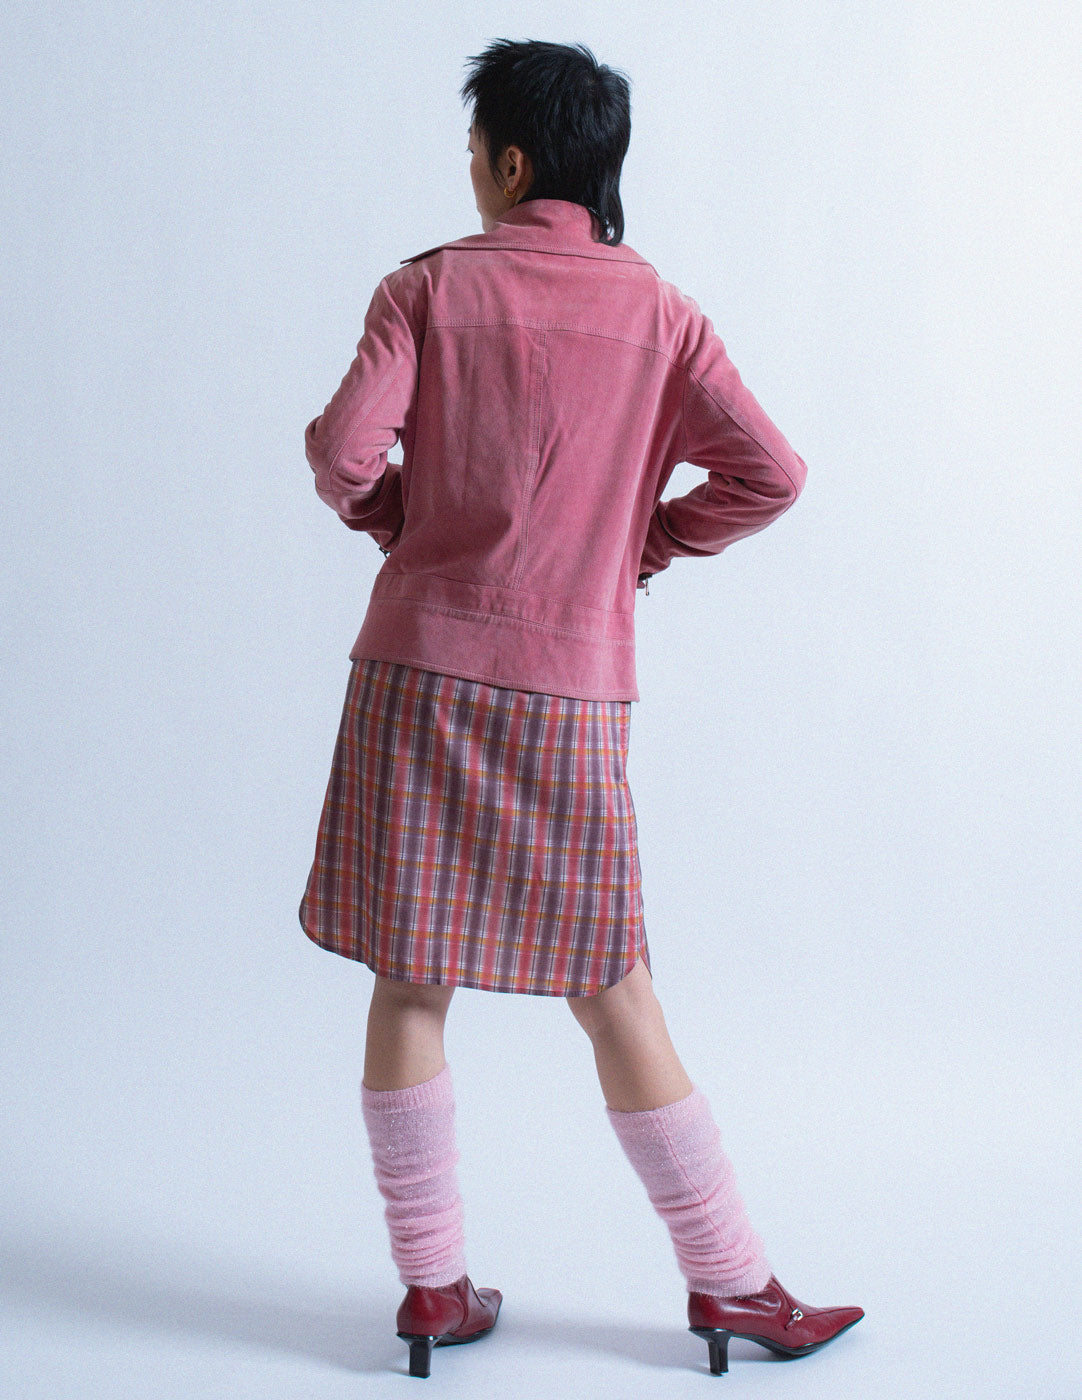 D&G pink suede moto jacket back view